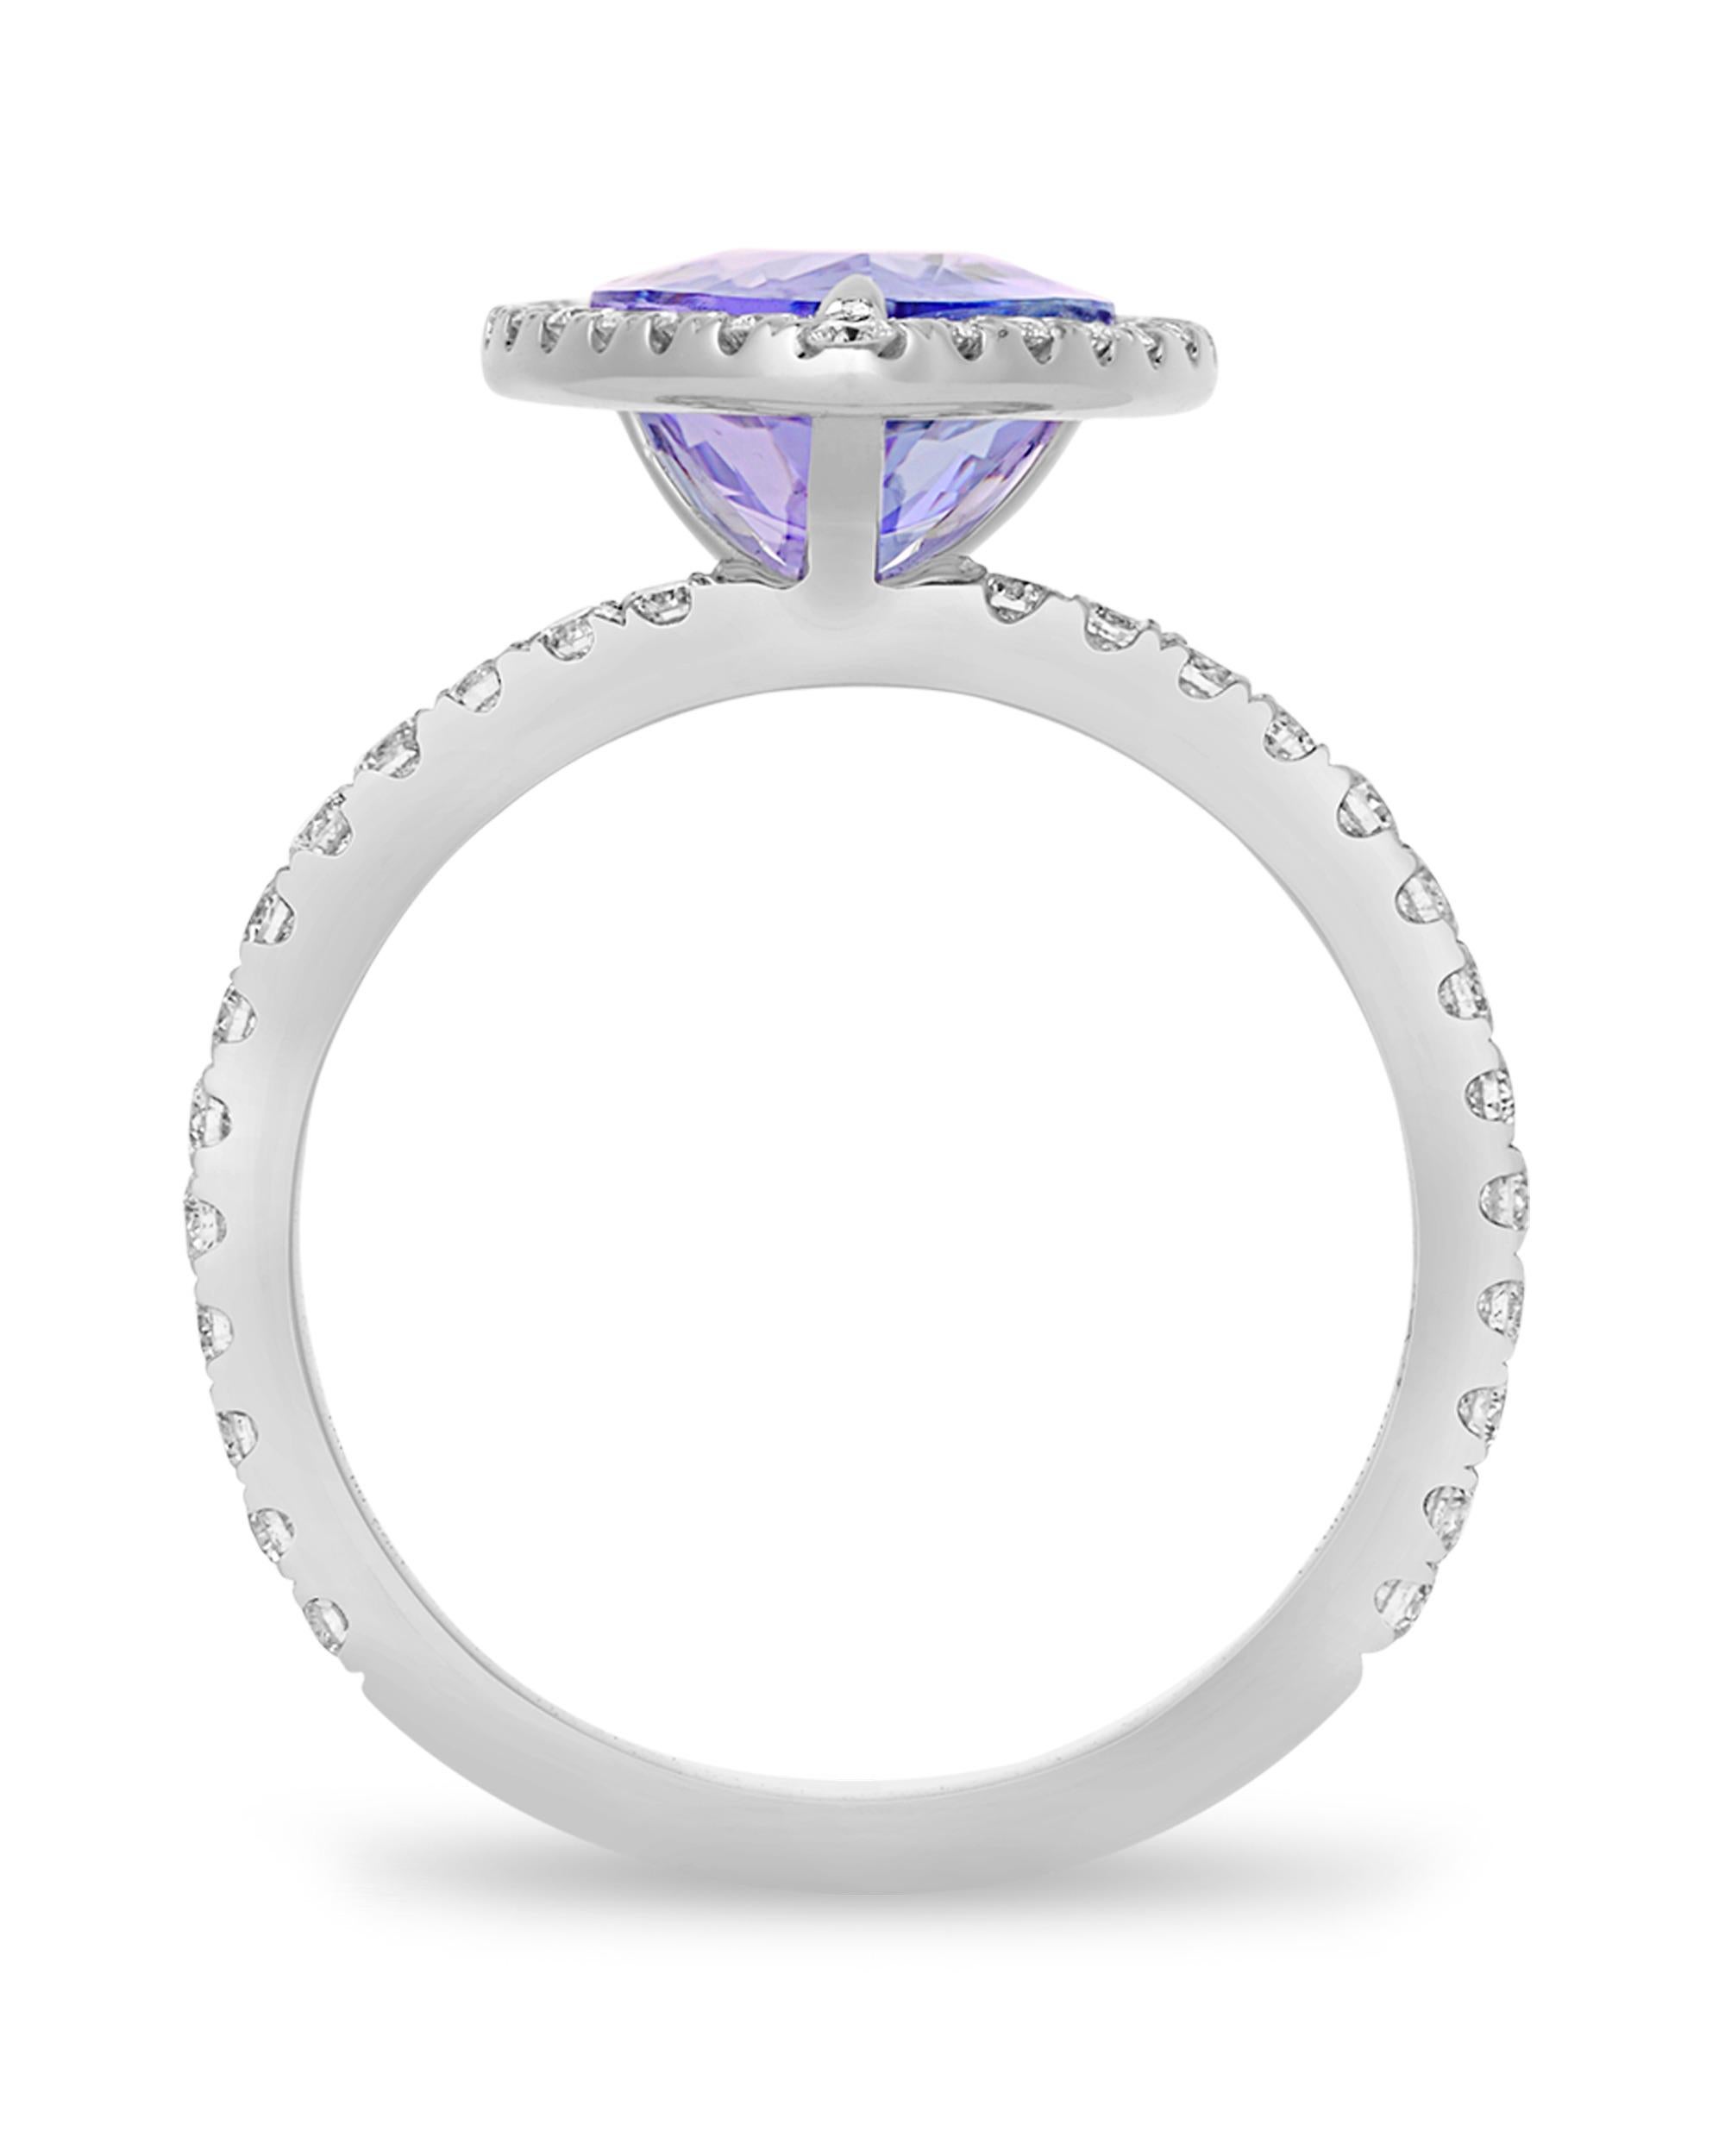 A violet-hued pear-shaped tanzanite weighing 3.28 carats is set in this classic ring. Diamond accents totaling approximately 0.66 carat join the gem in its 18K white gold setting.